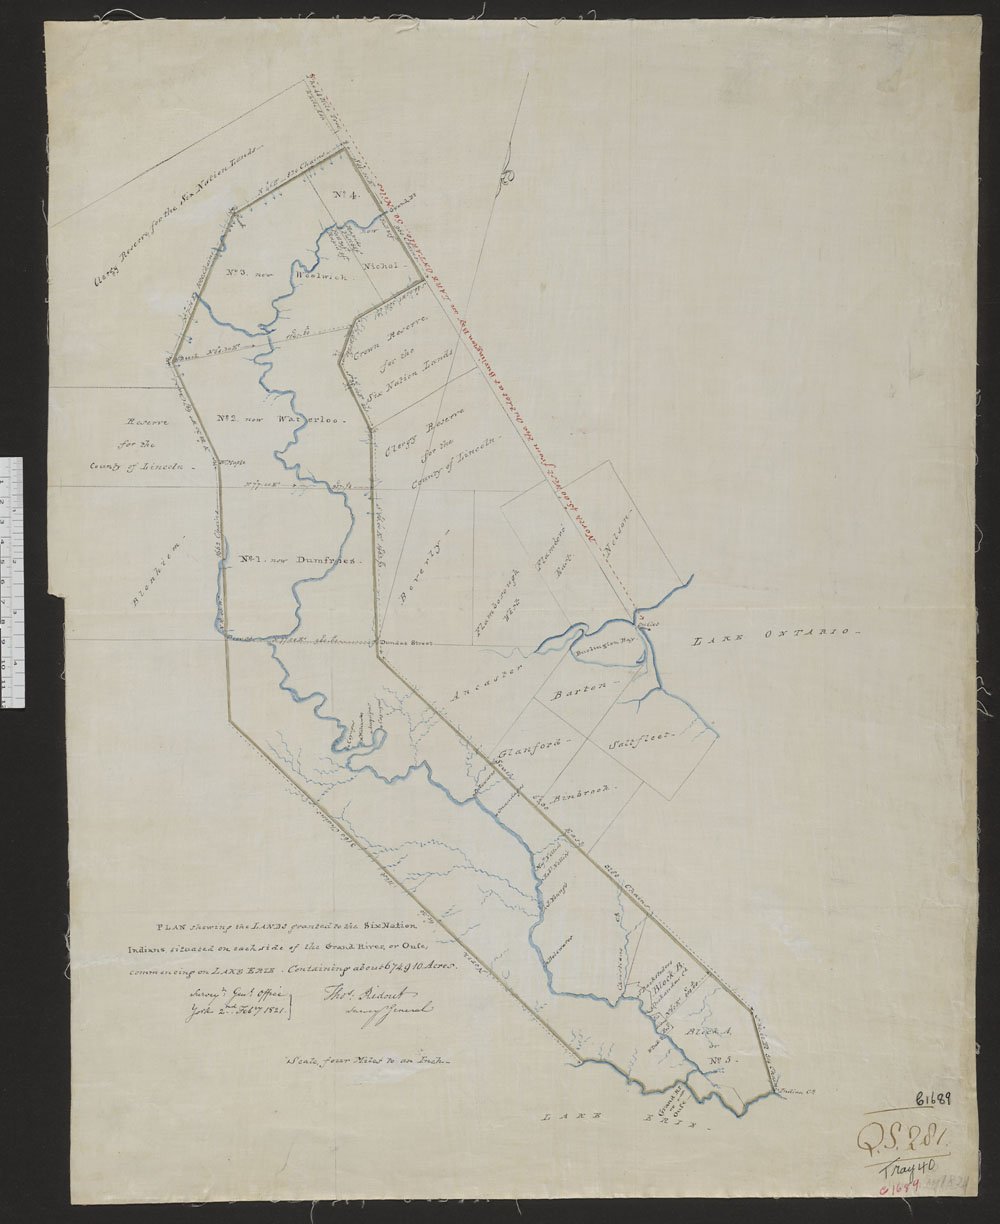 An 1821 map from the Surveyor General showing the size of the Haldimand Tract. 